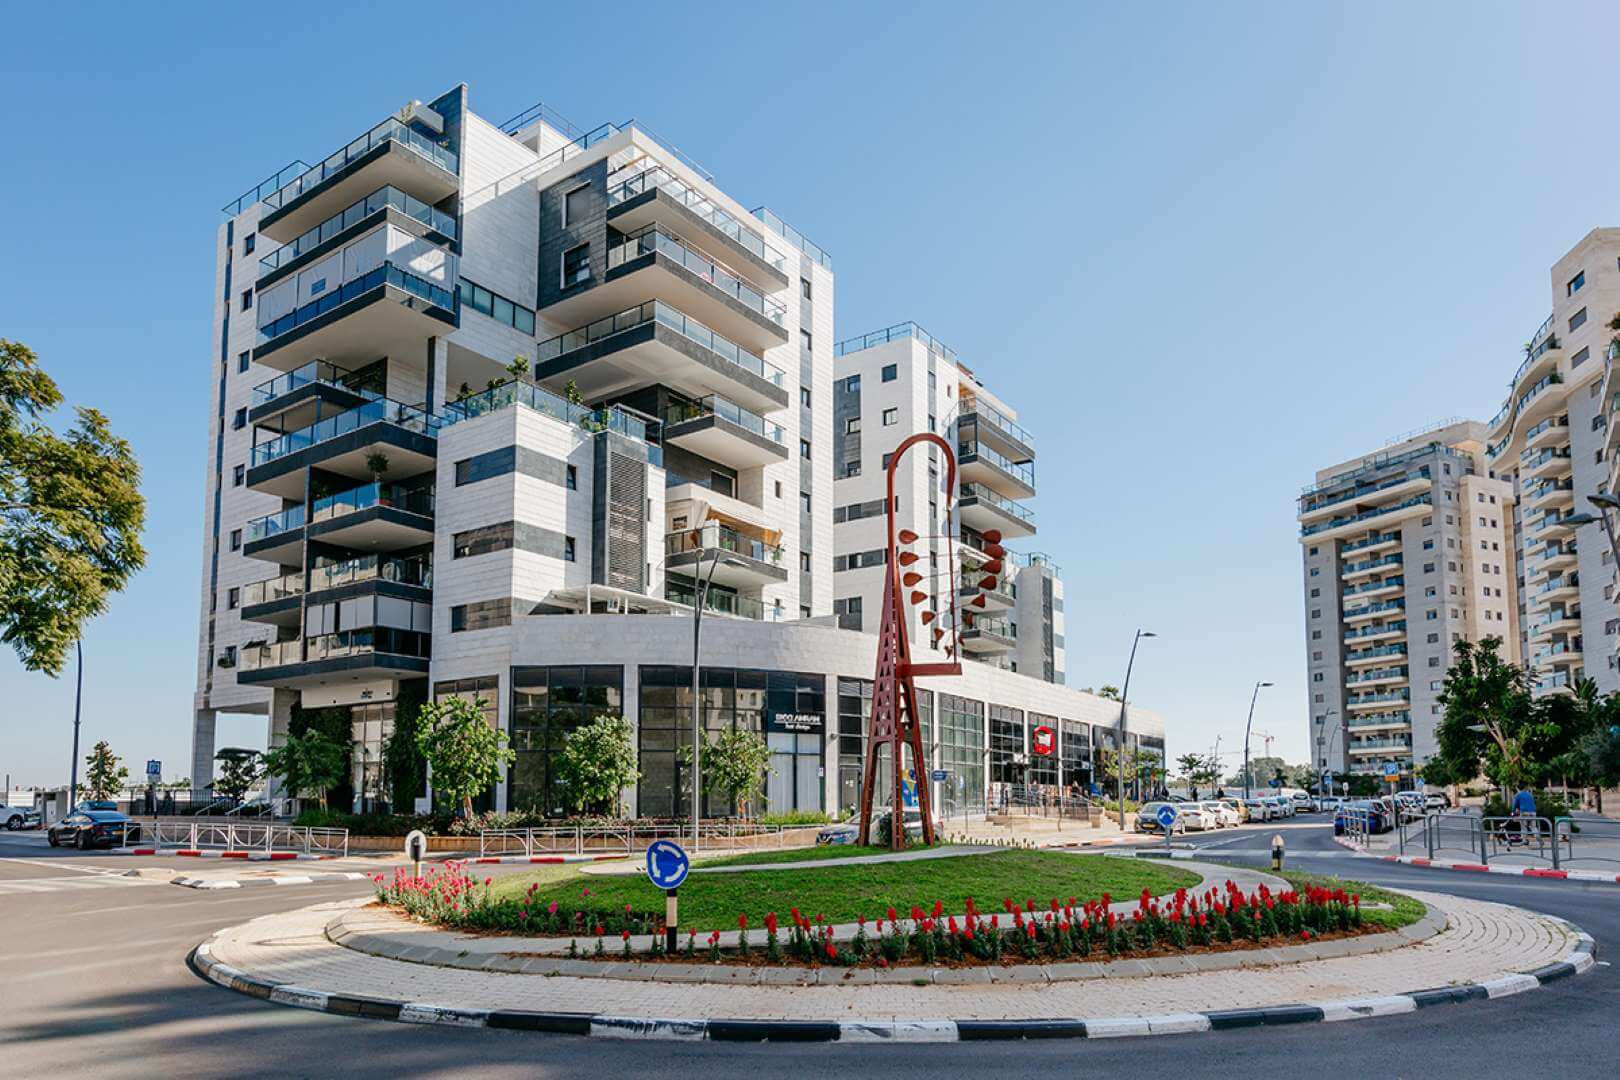 Photograph of a building from the UNIK BOUTIQUE project in Rishon Lezion